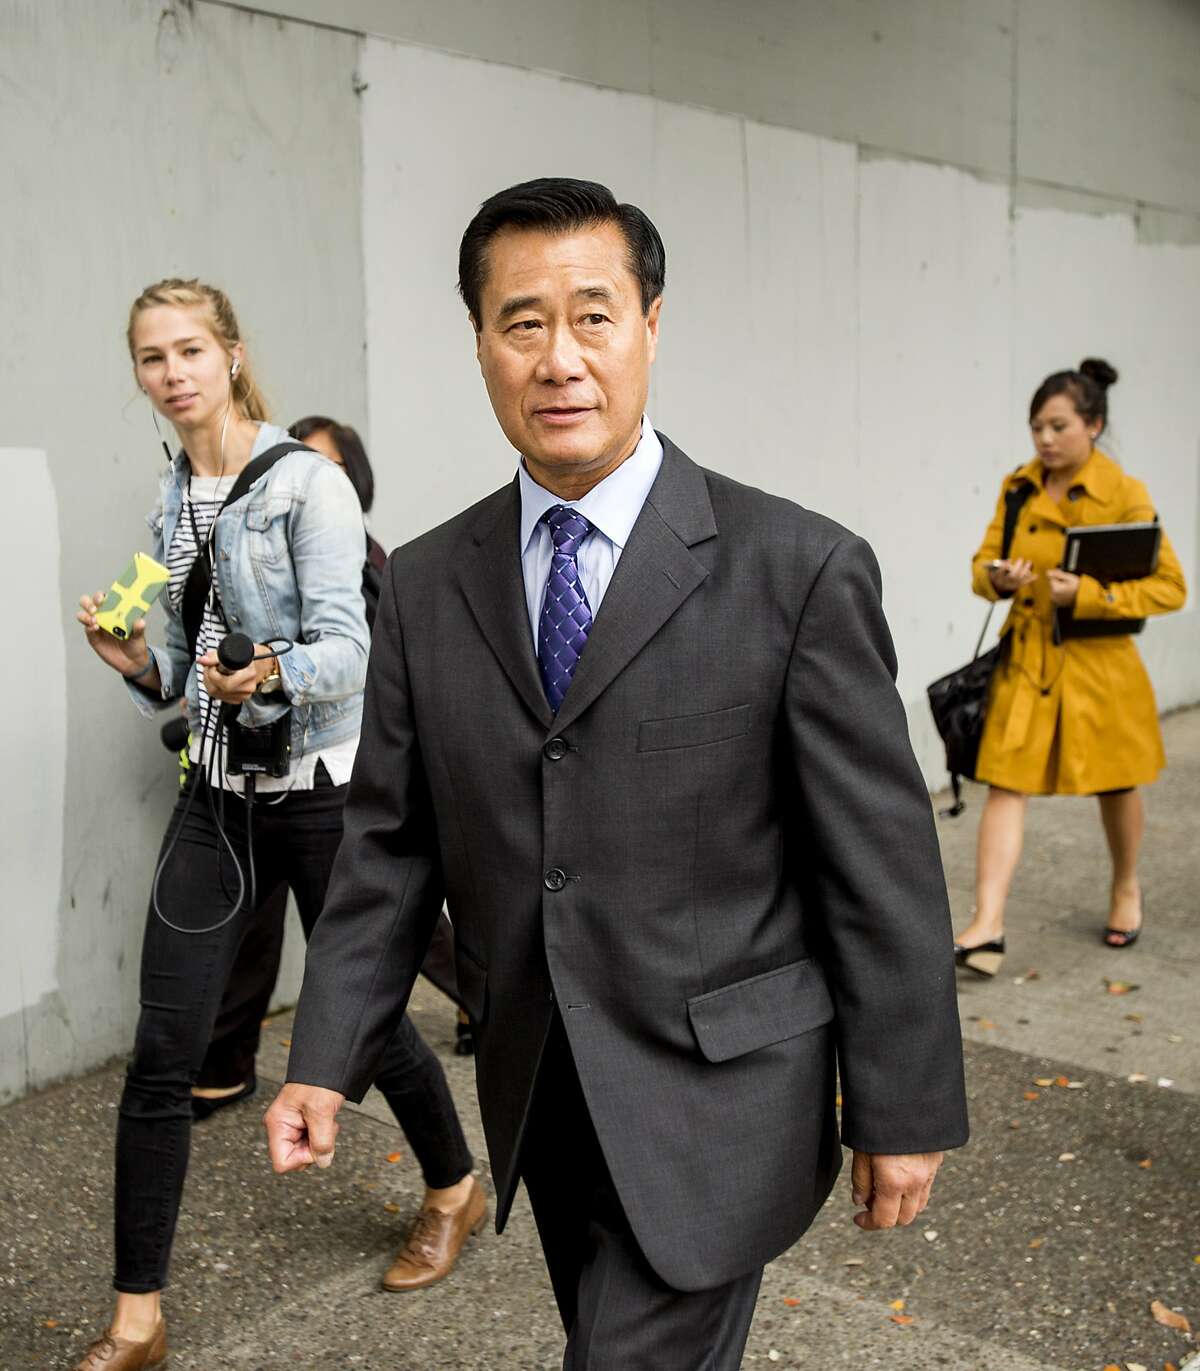 California state Sen. Leland Yee leaves federal court in San Francisco on Thursday, July 31, 2014.